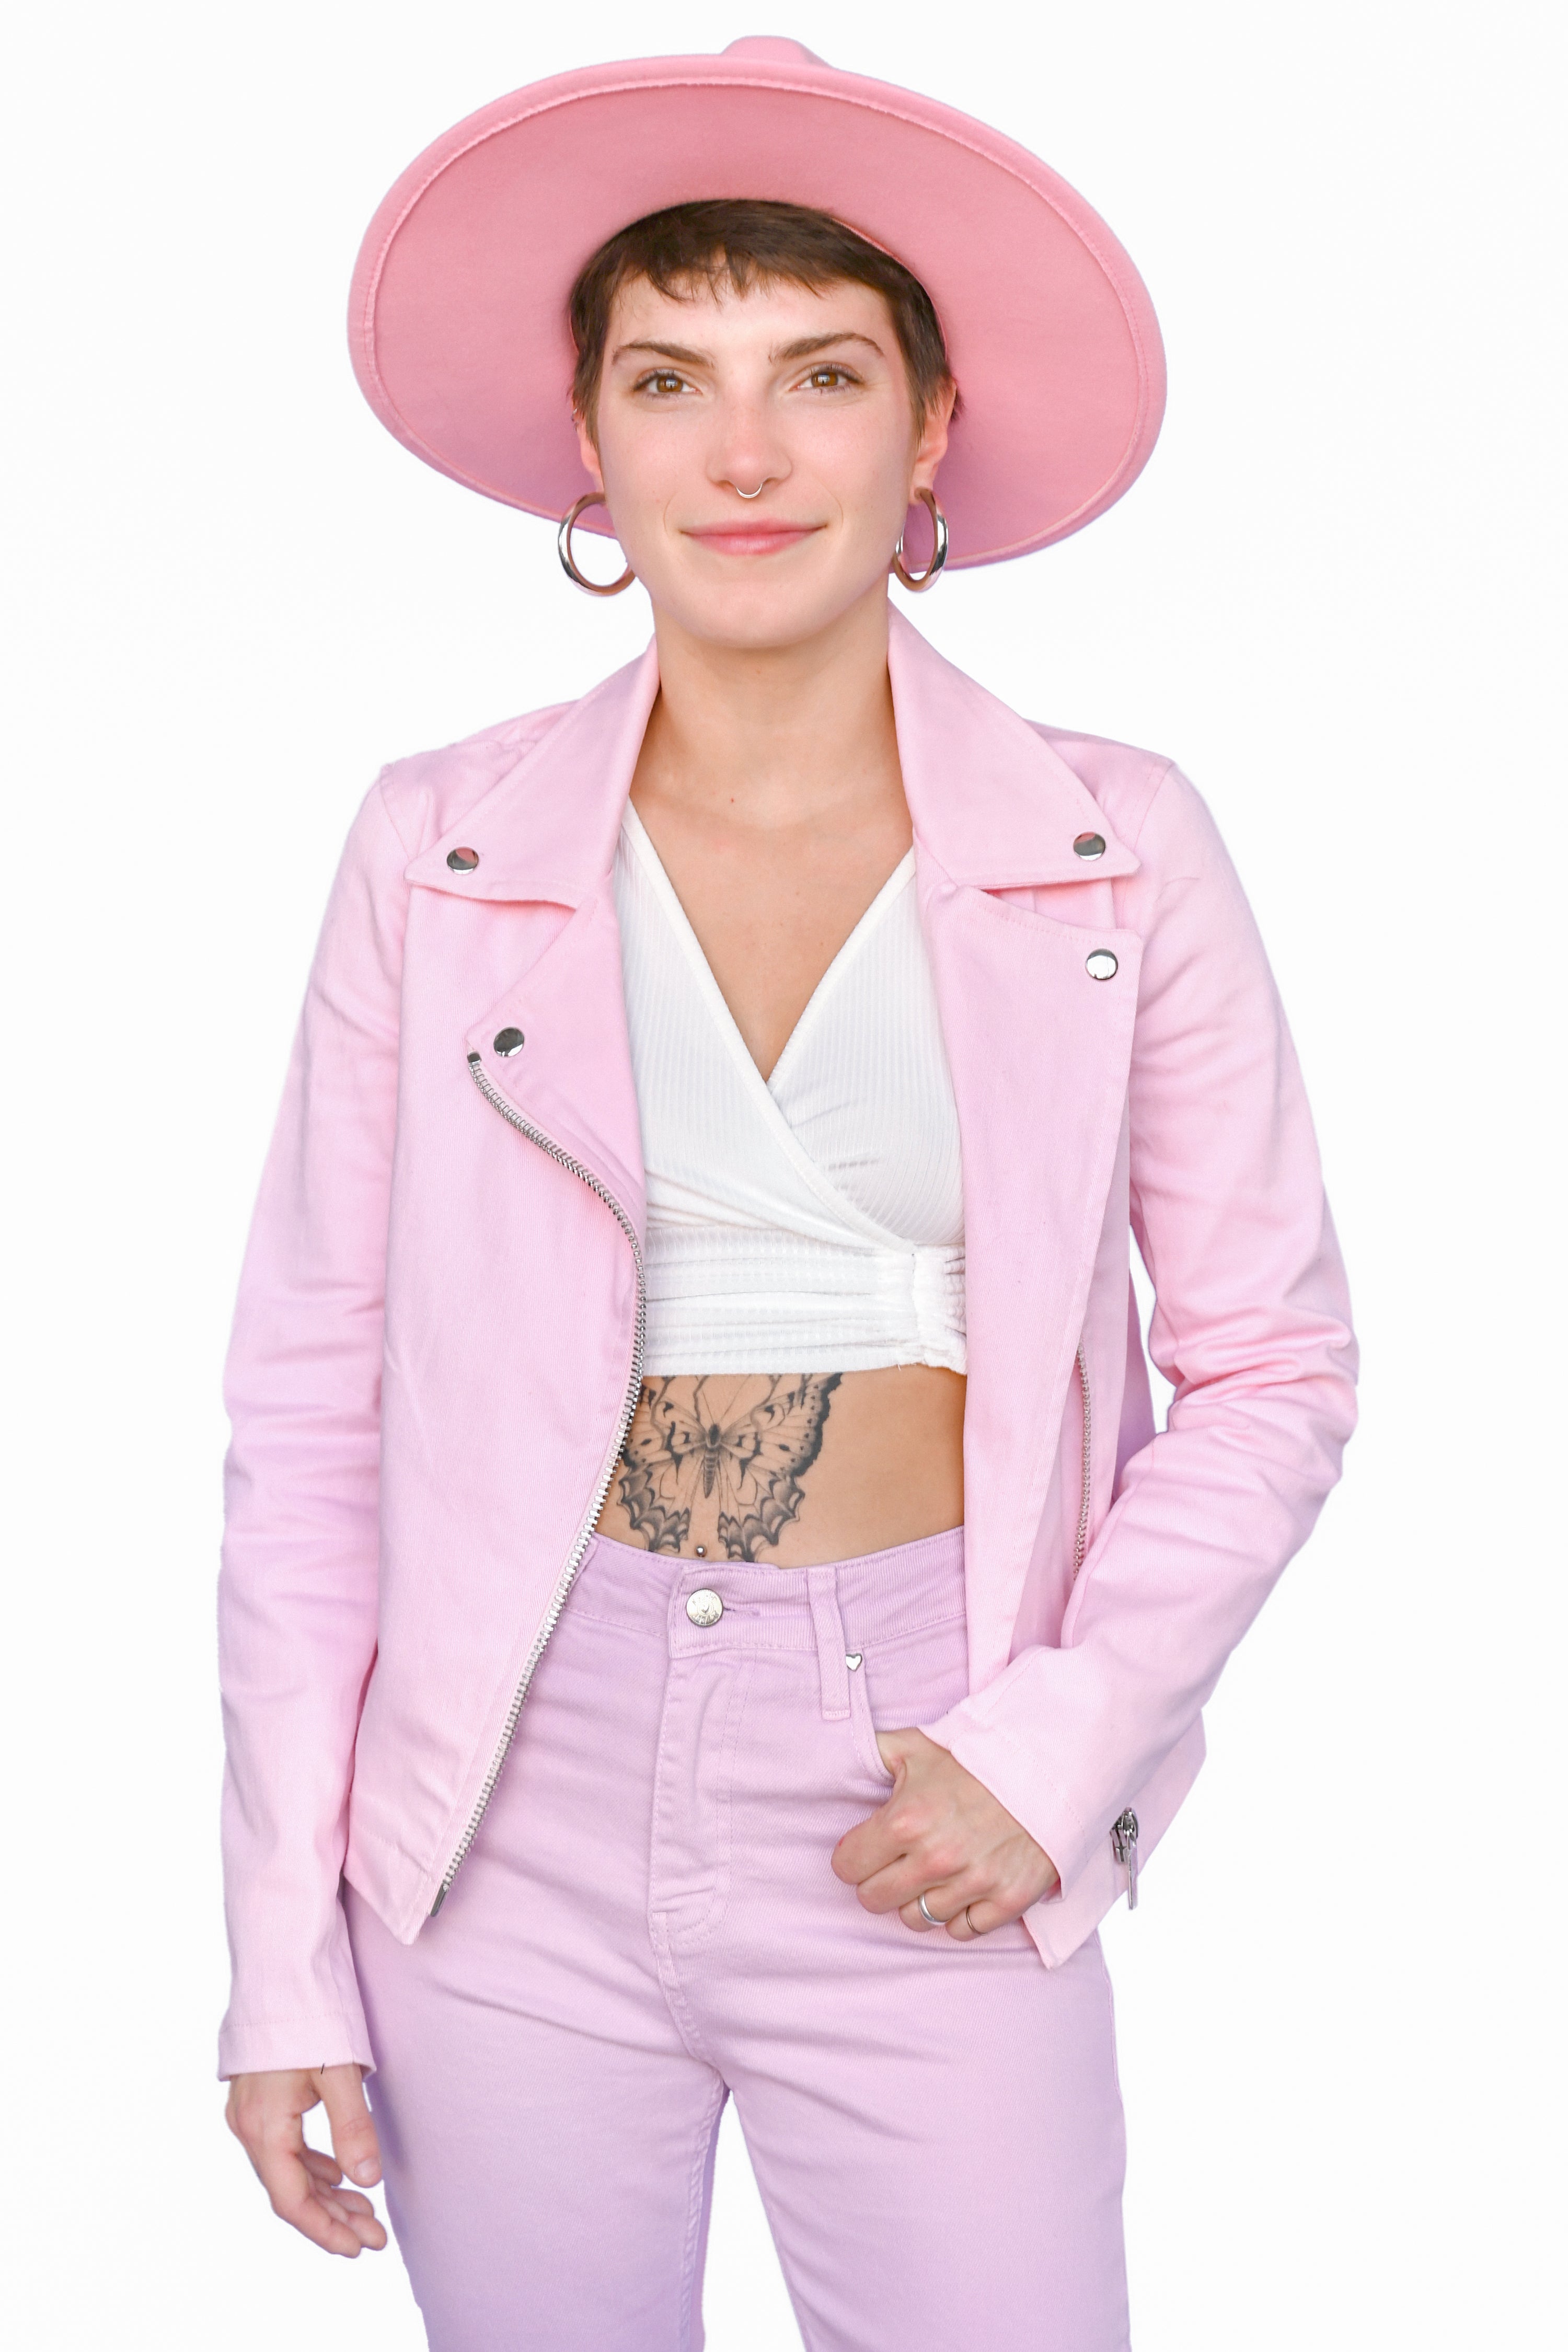 A slightly oversized stretch pink denim motorcycle jacket just begging for all your pins and patches